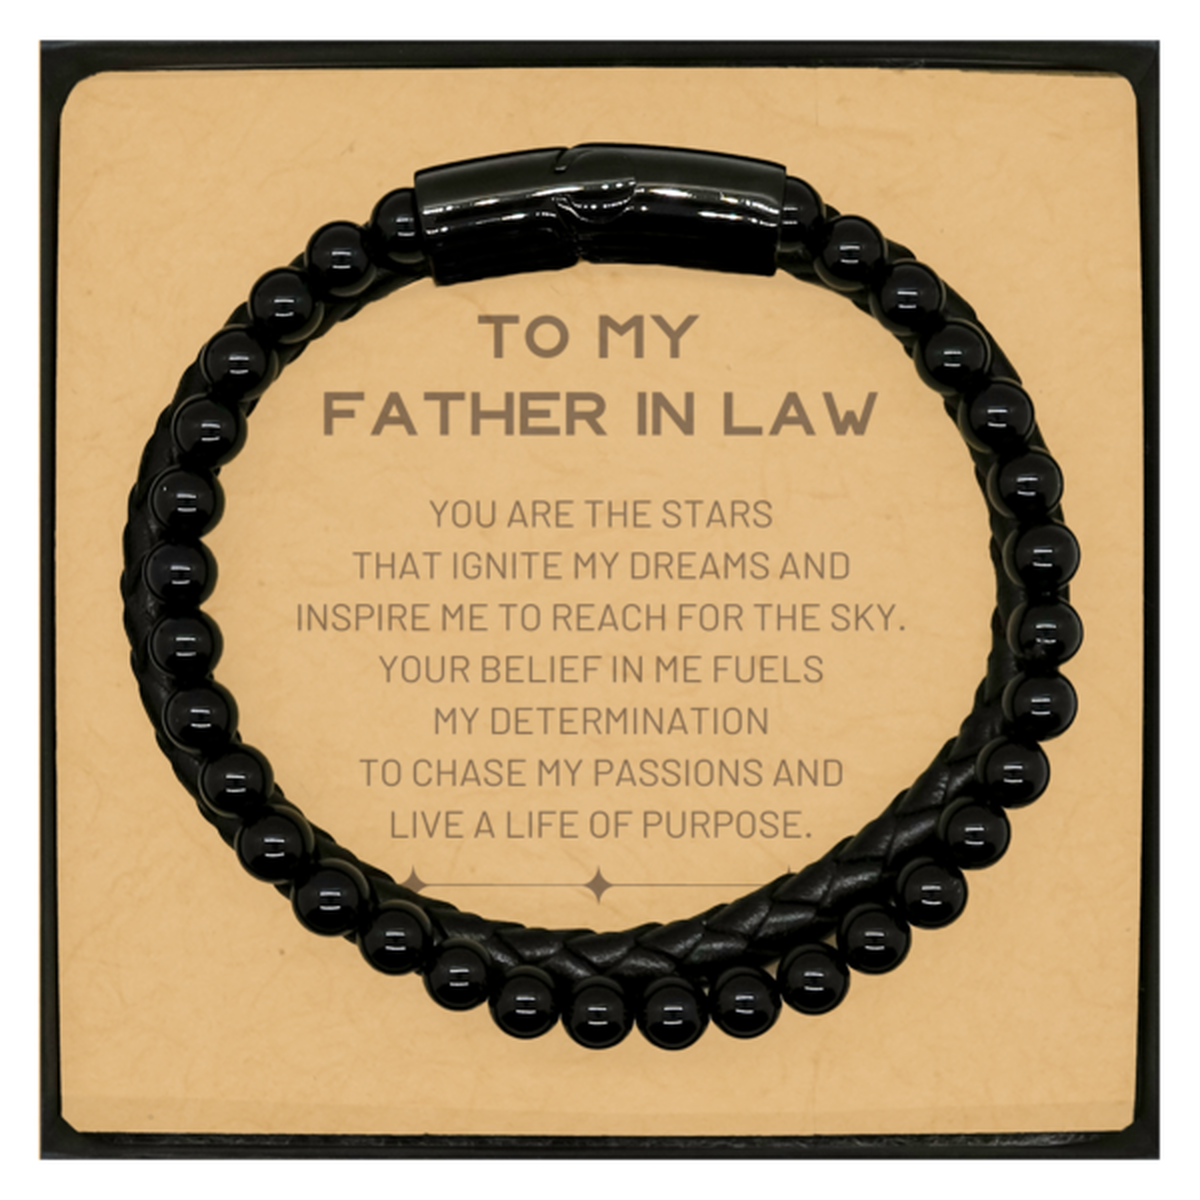 To My Father In Law Stone Leather Bracelets, You are the stars that ignite my dreams and inspire me to reach for the sky, Birthday Christmas Unique Gifts For Father In Law, Thank You Gifts For Father In Law